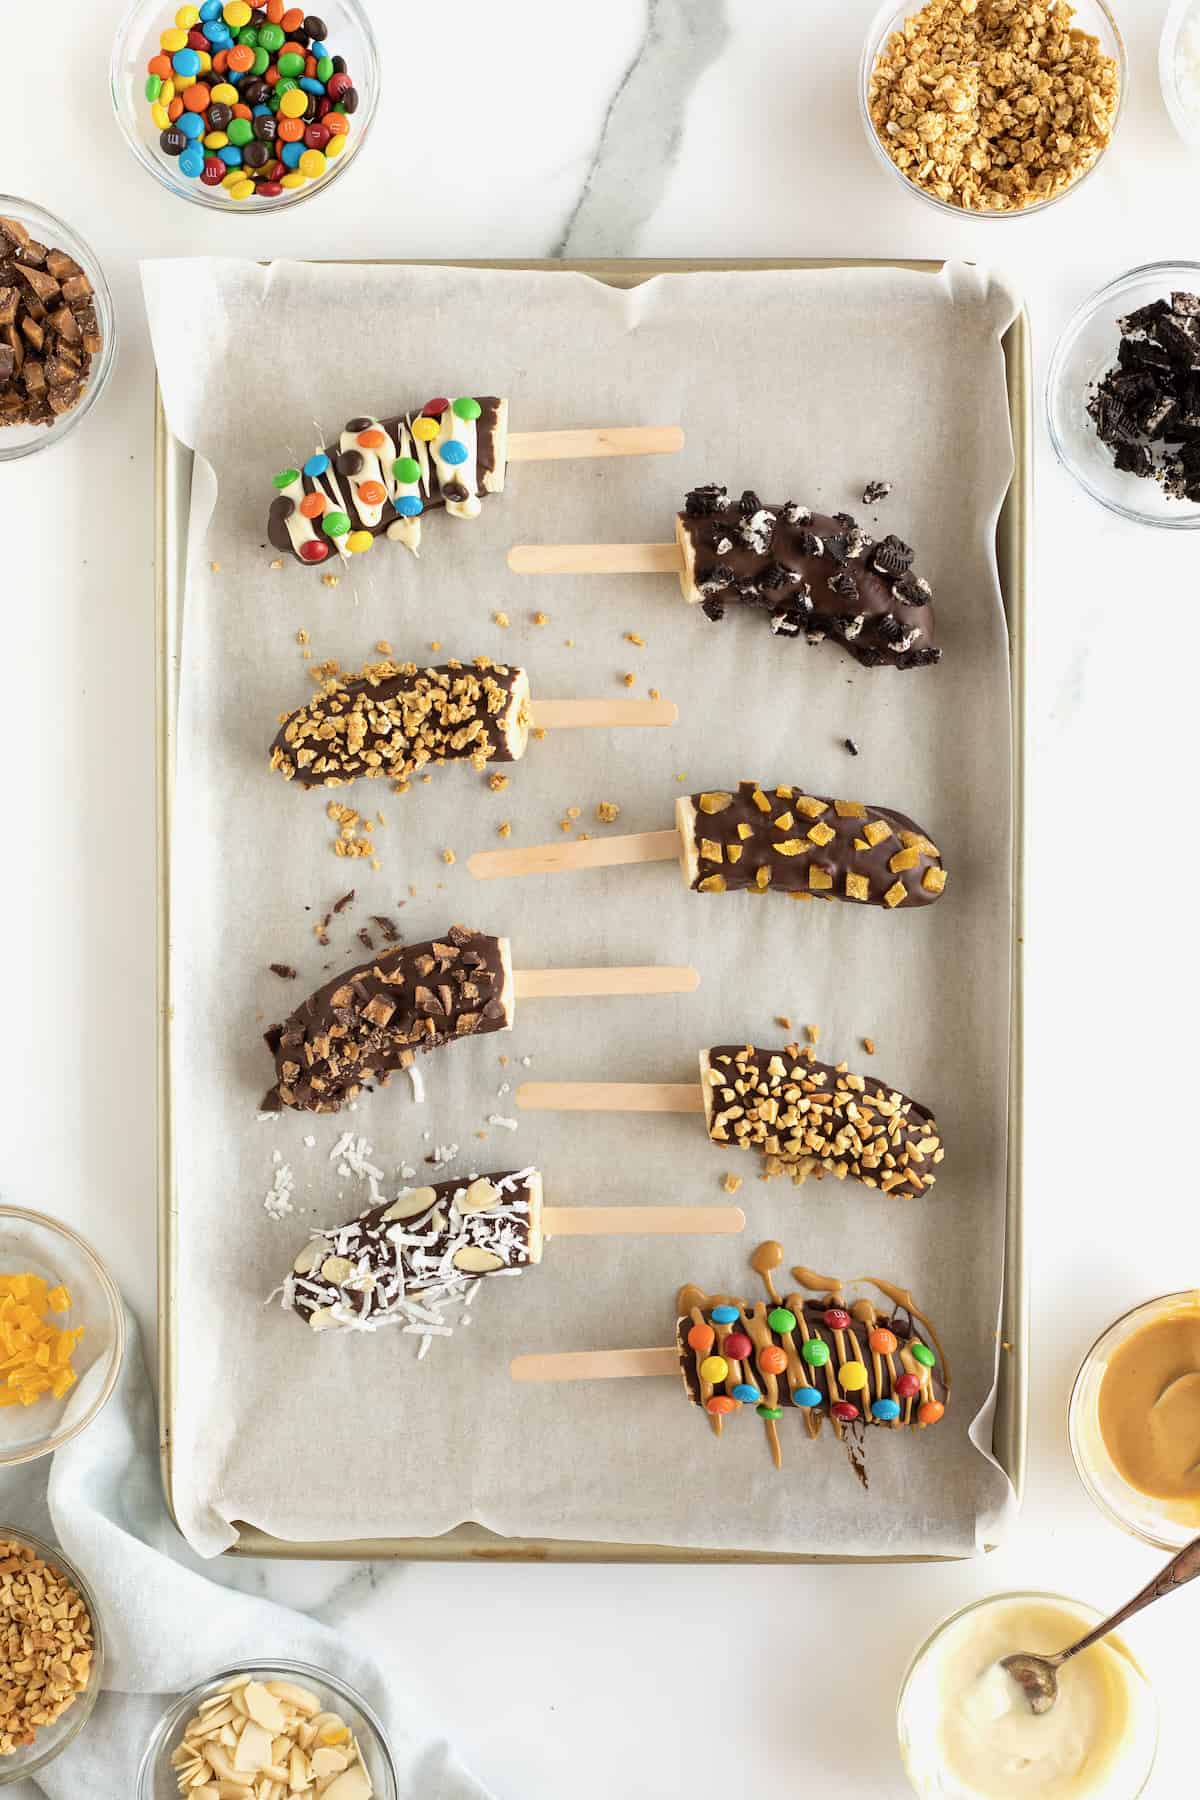 Frozen bananas with popsicles sticks covered in chocolate and mini M&Ms, mini chocolate chips, crushed peanuts and coconut.